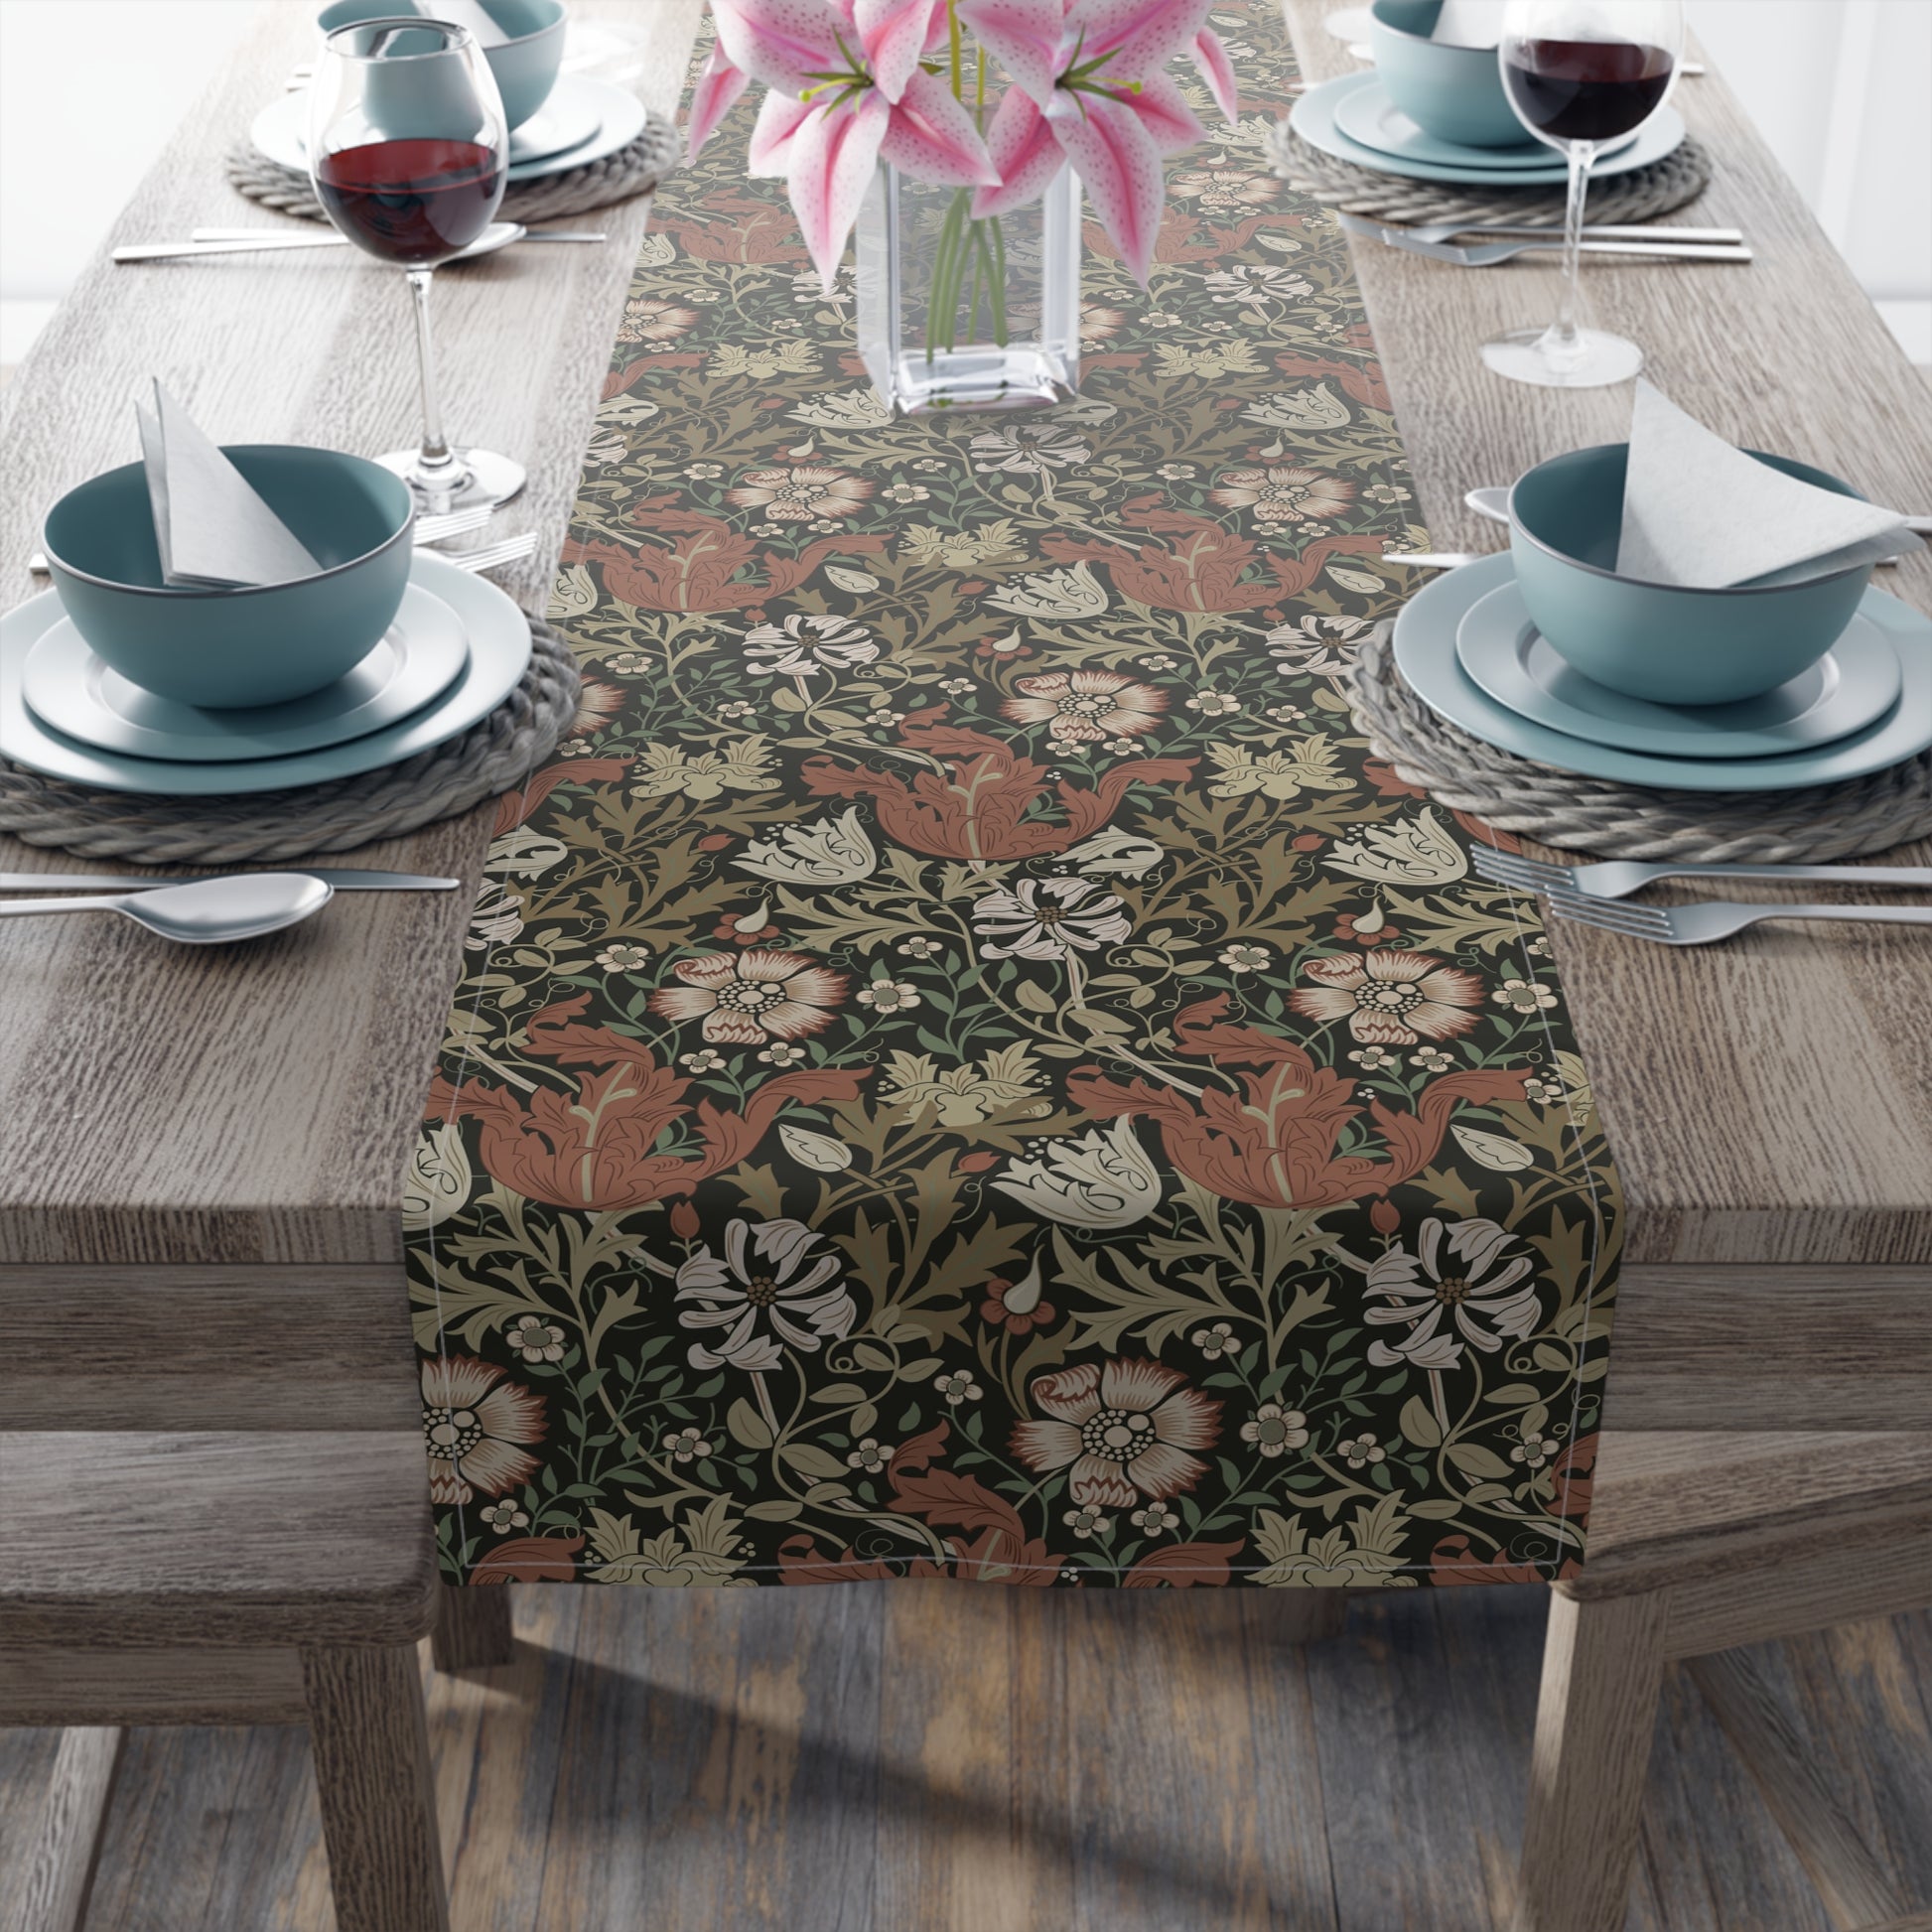 william-morris-co-table-runner-compton-collection-moor-cottage-3